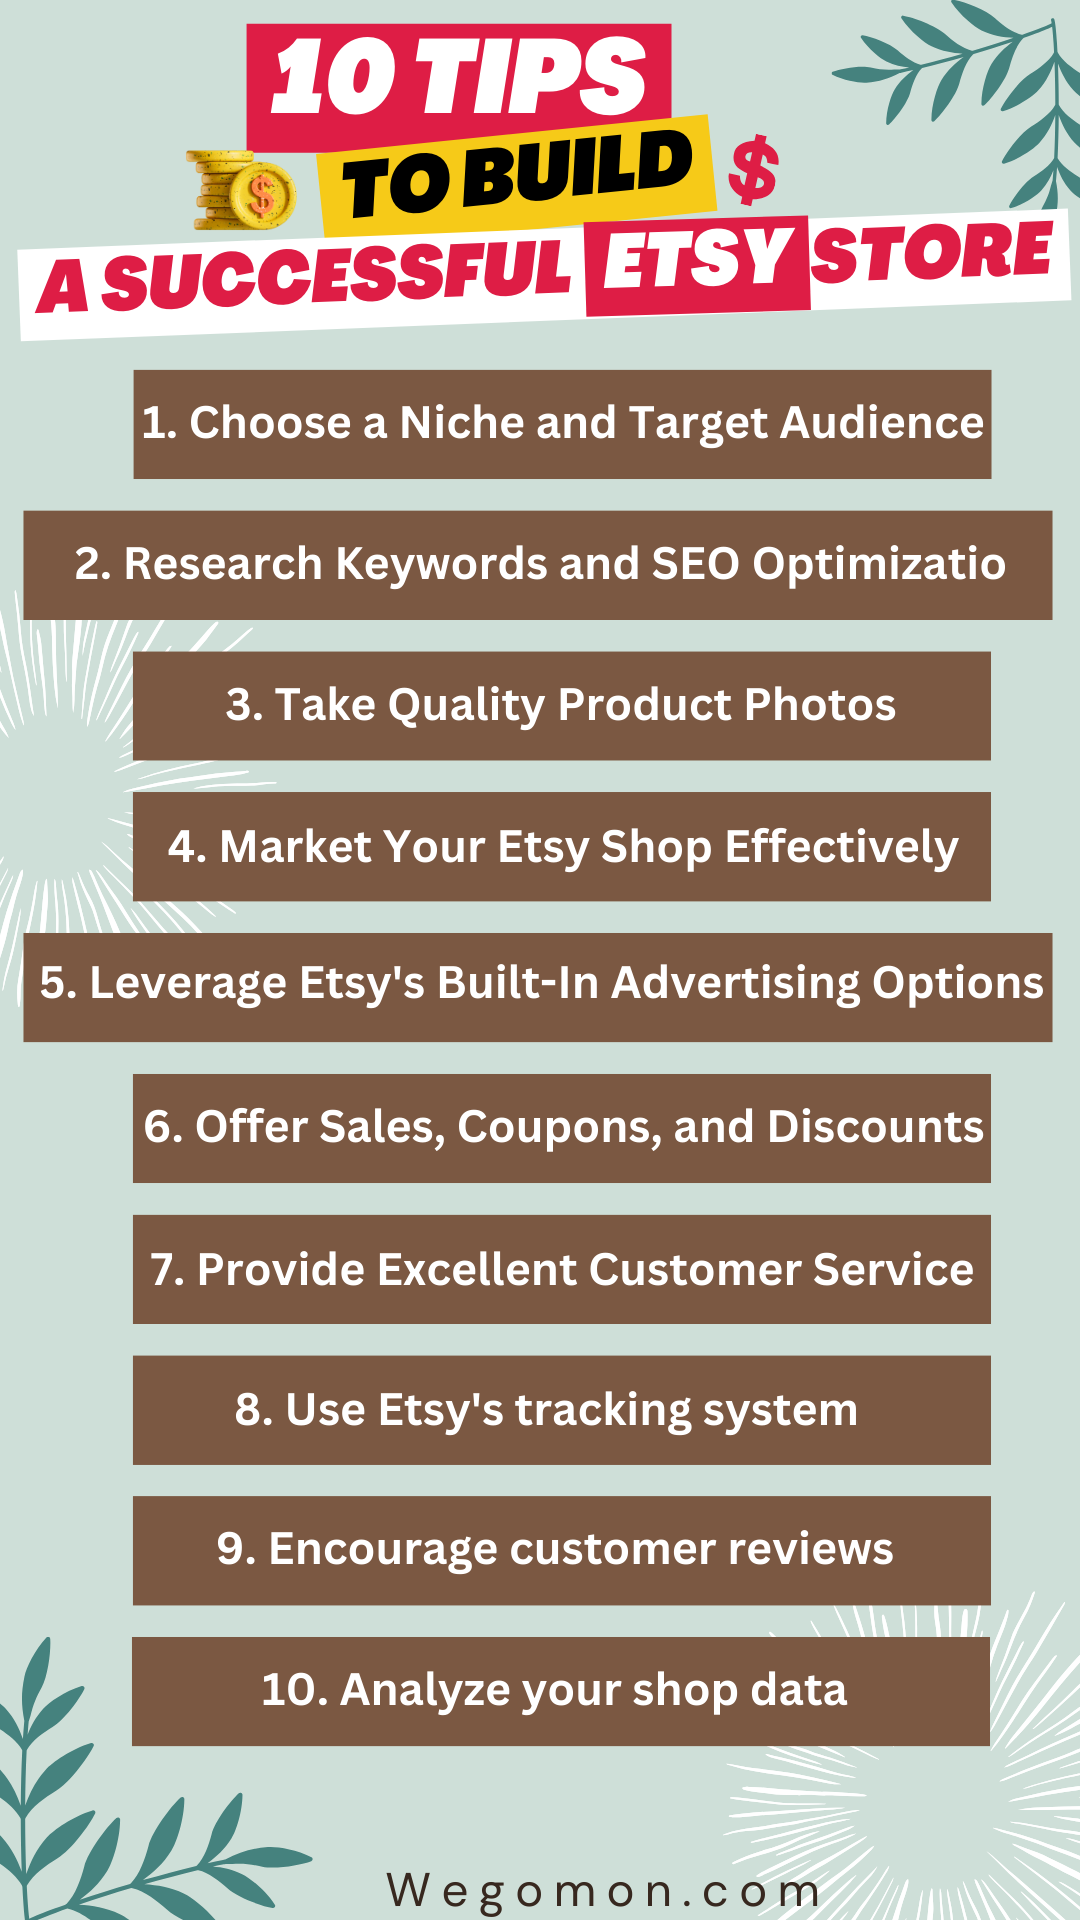 Top 10 tips to build a successful Etsy store